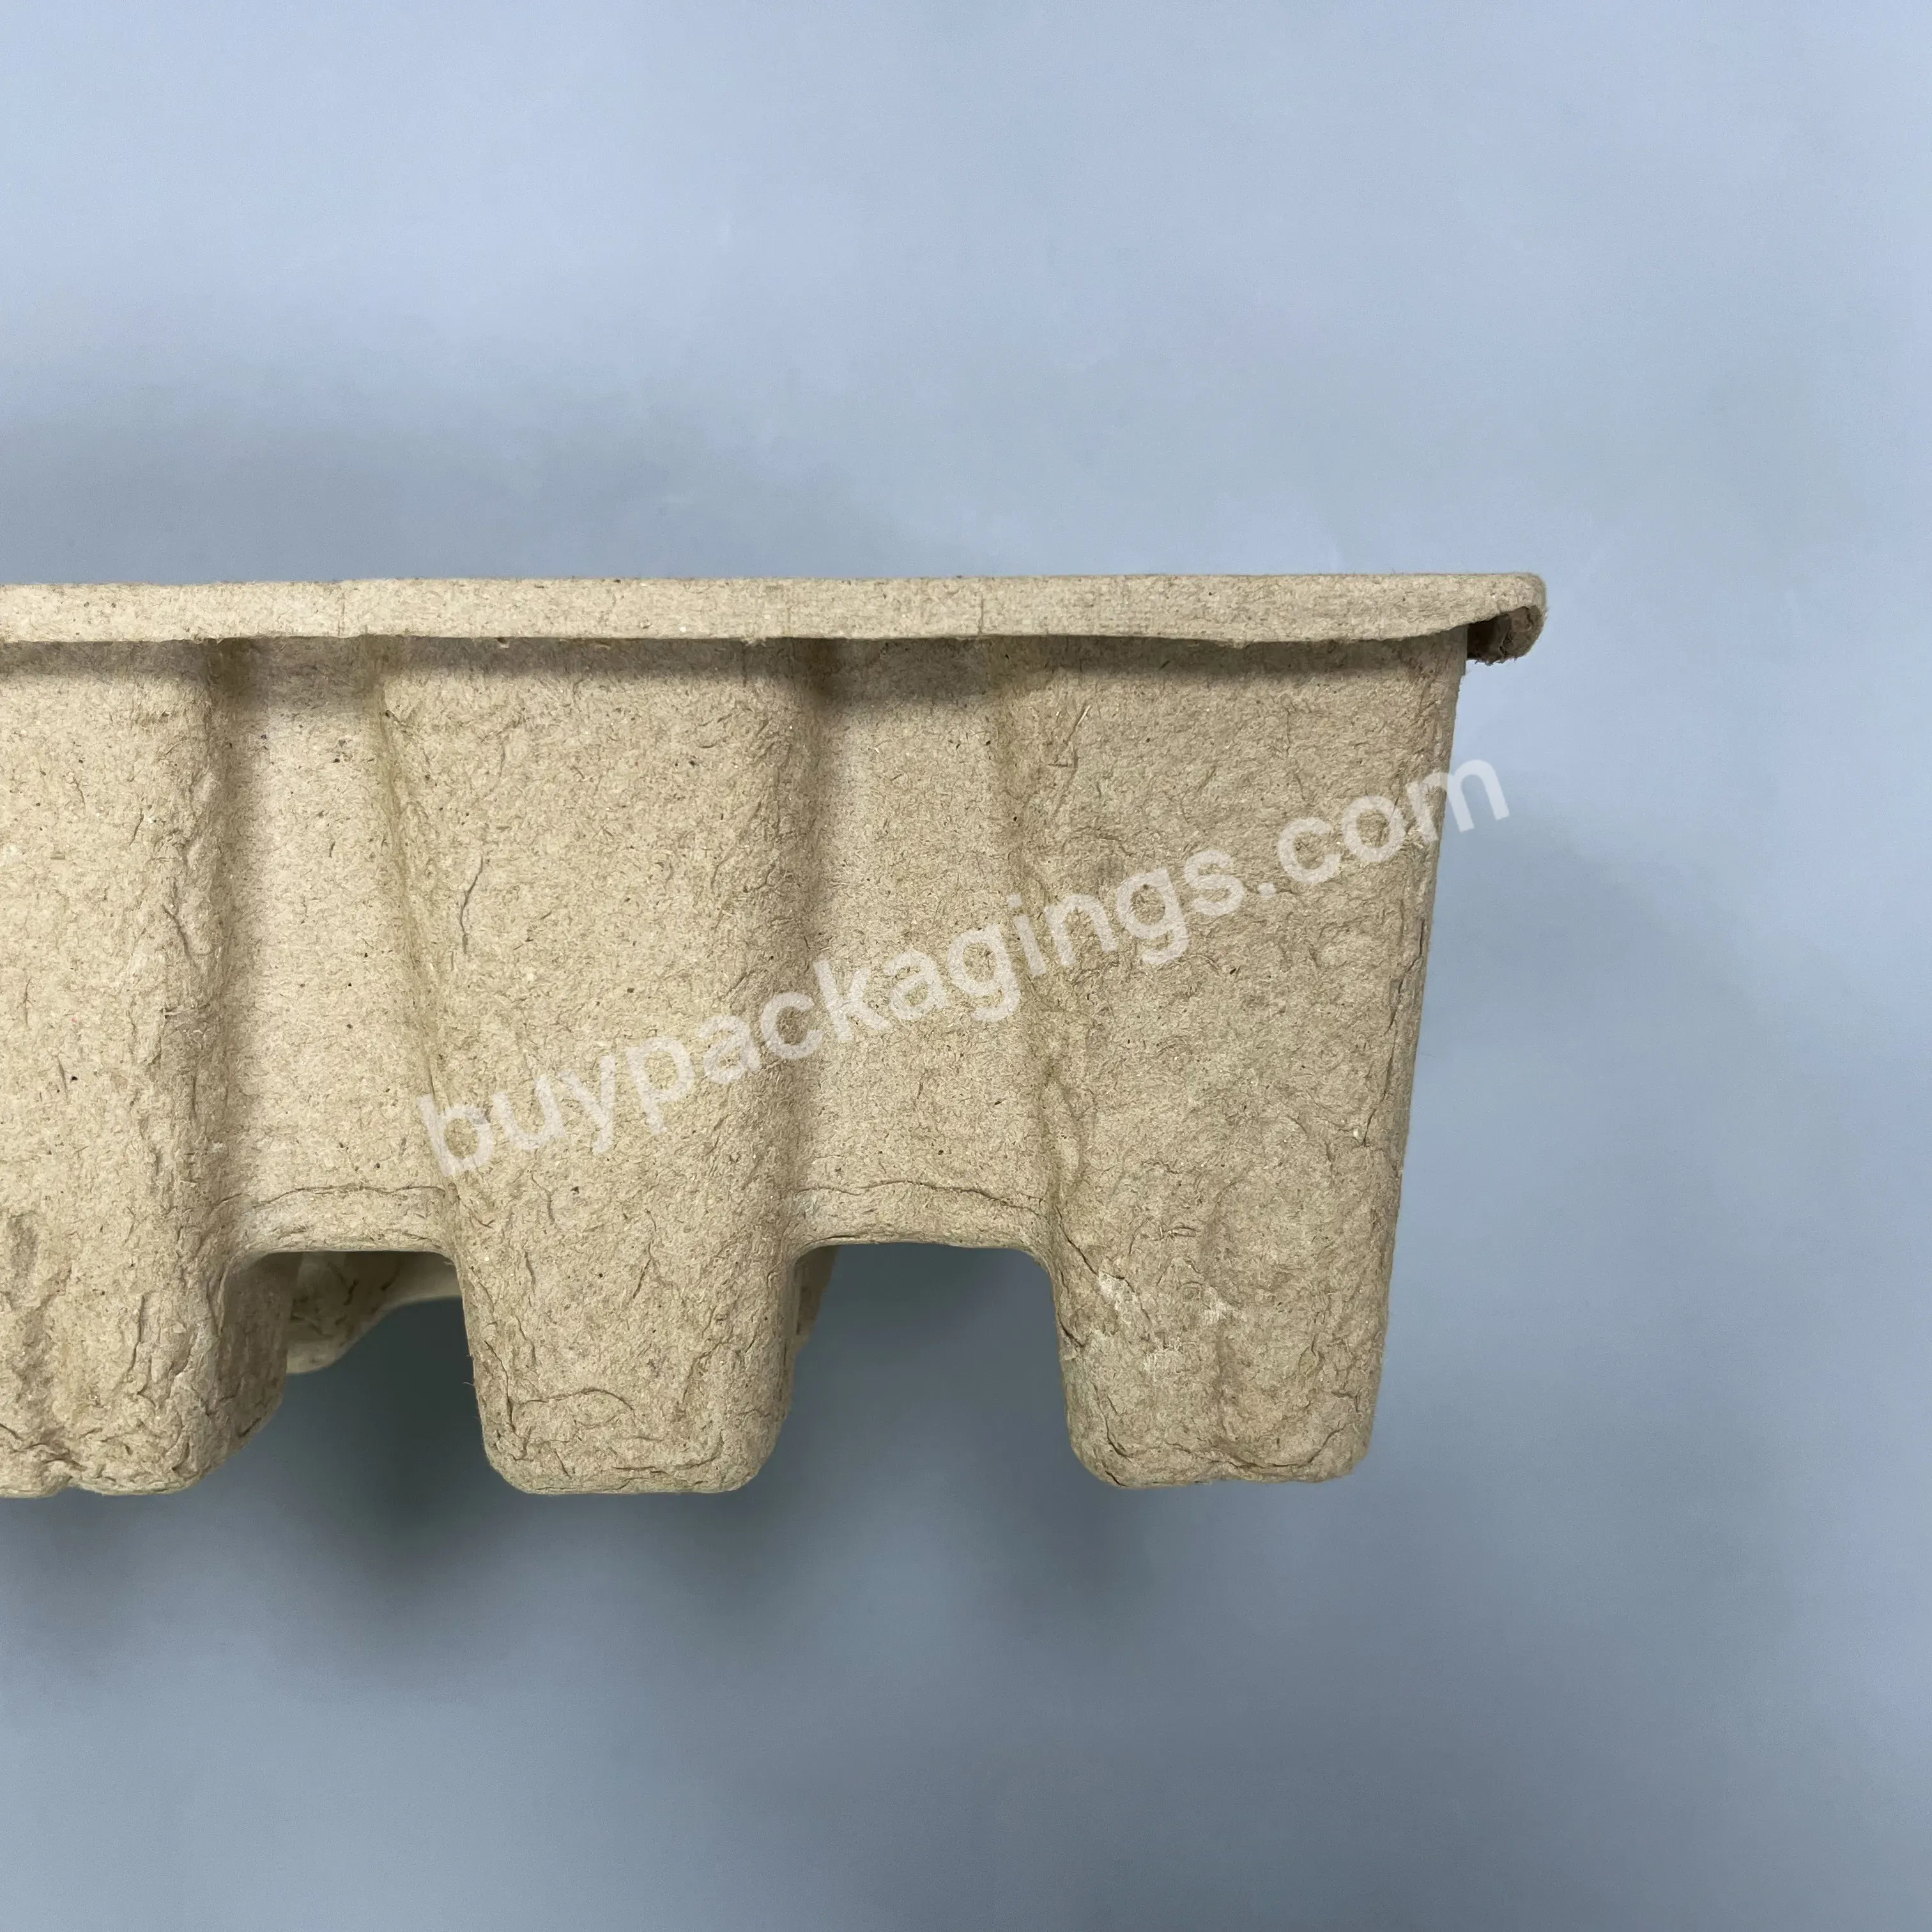 Recyclable Molded Pulp Protective Dry Press Tray Packaging Tray Insert Dry Press Sugarcane Material - Buy Pulp Molded Paper Packaging Tray Insert,Biodegradable Paper Pulp Moulded Starter Tray Packaging,Custom Recyclable Molded Pulp Protective Dry Pre